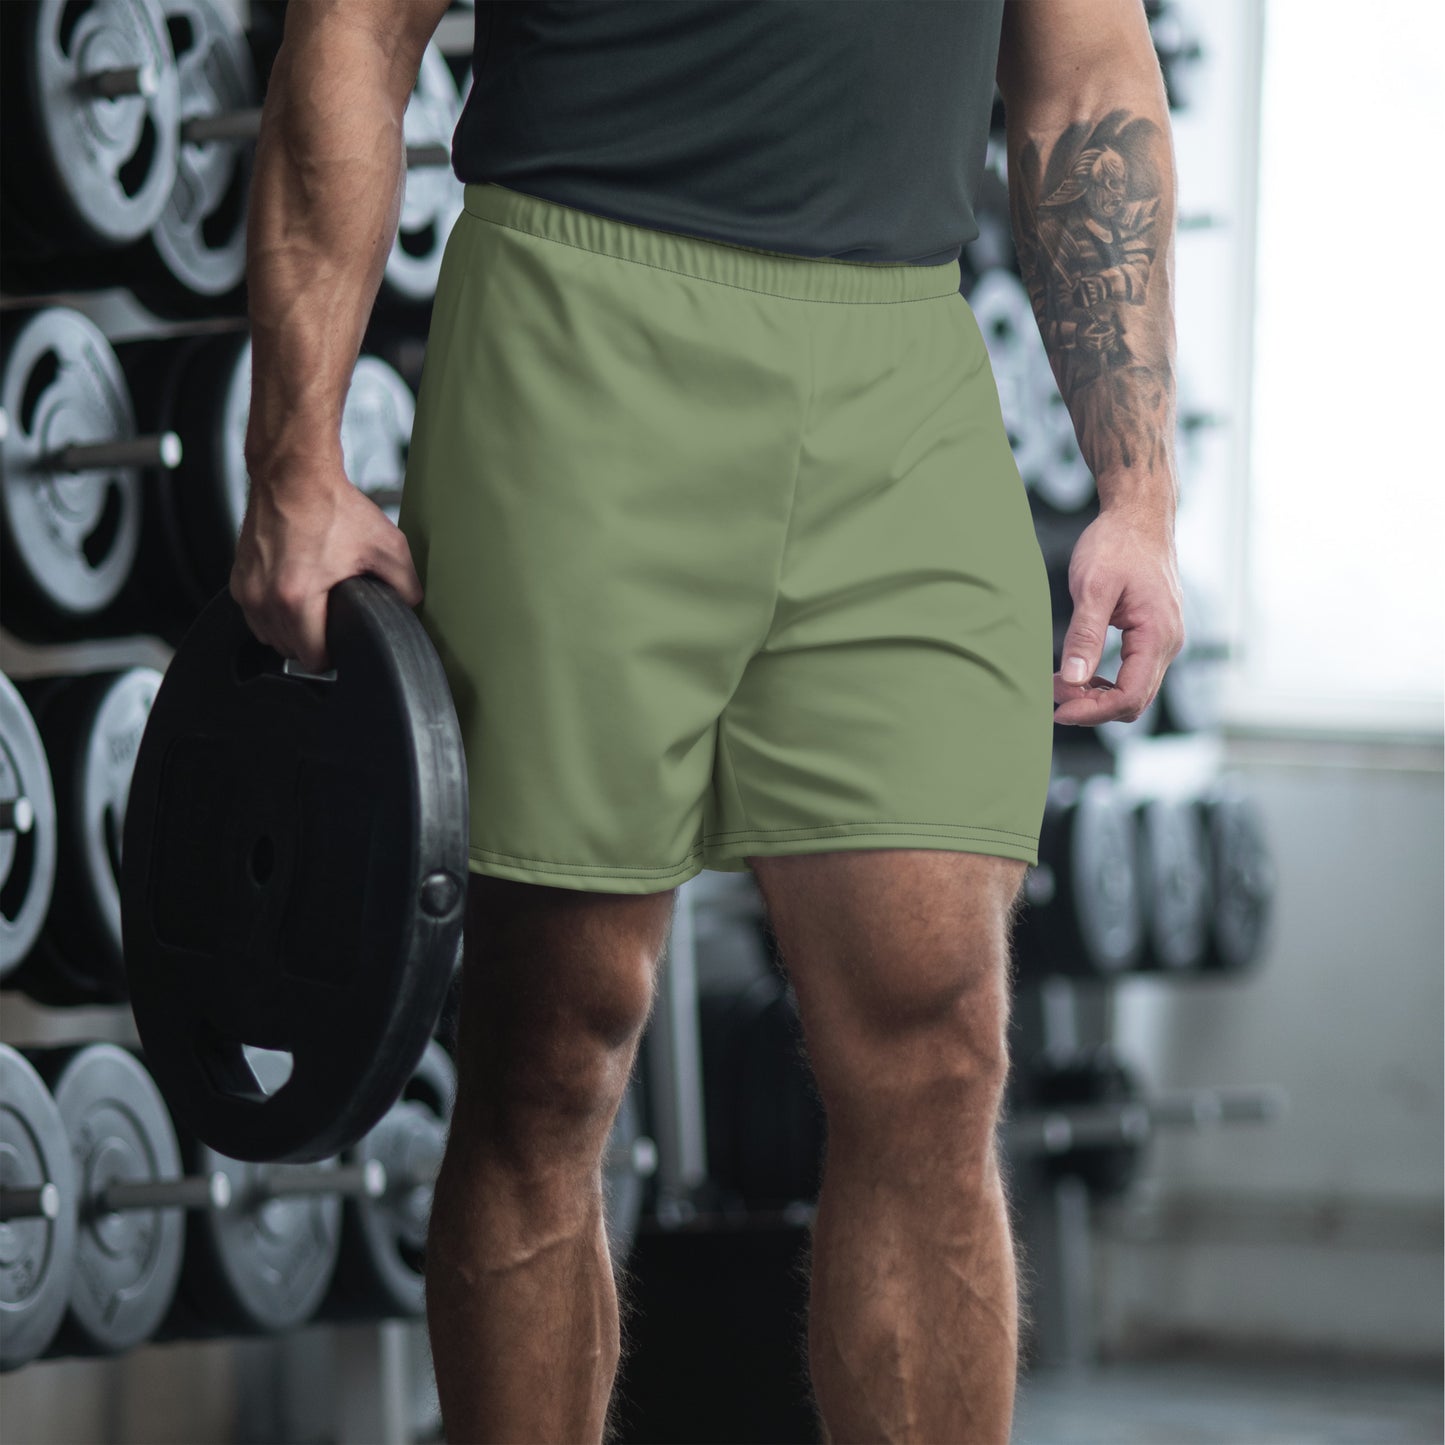 Men's Recycled Athletic Shorts - Light Green